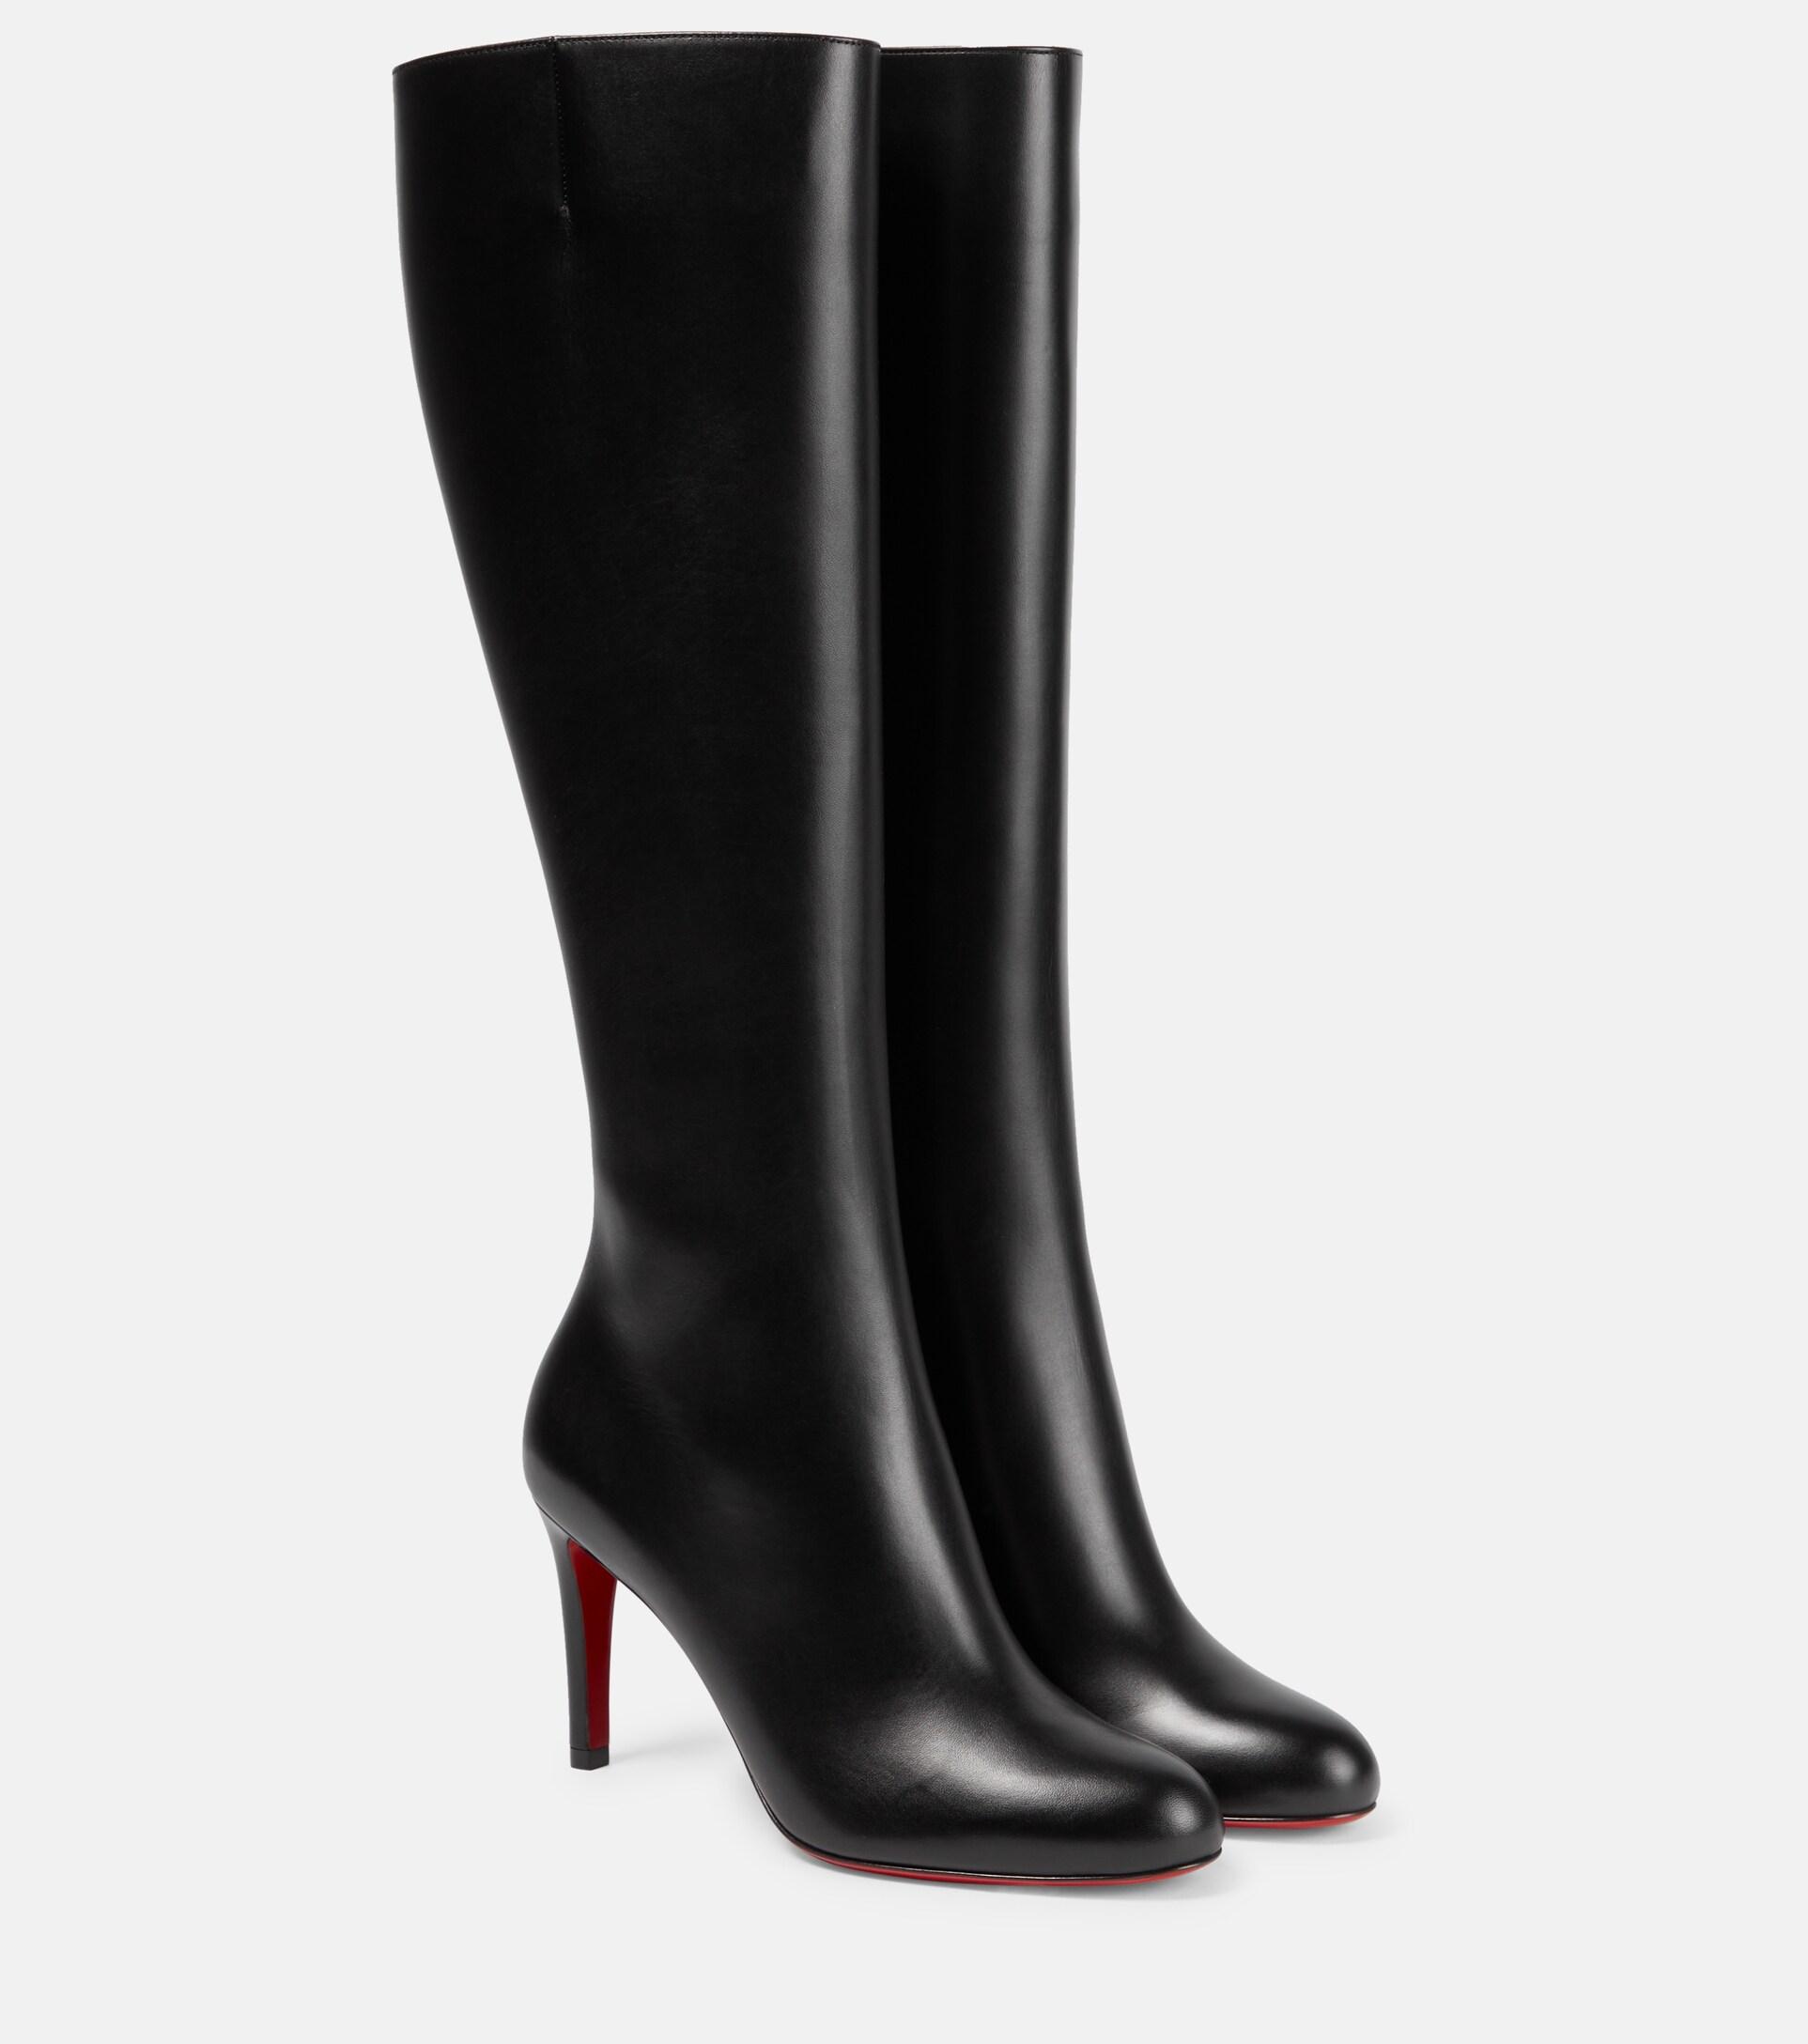 Christian Louboutin Pumppie Botta Leather Knee-high Boots in Black | Lyst